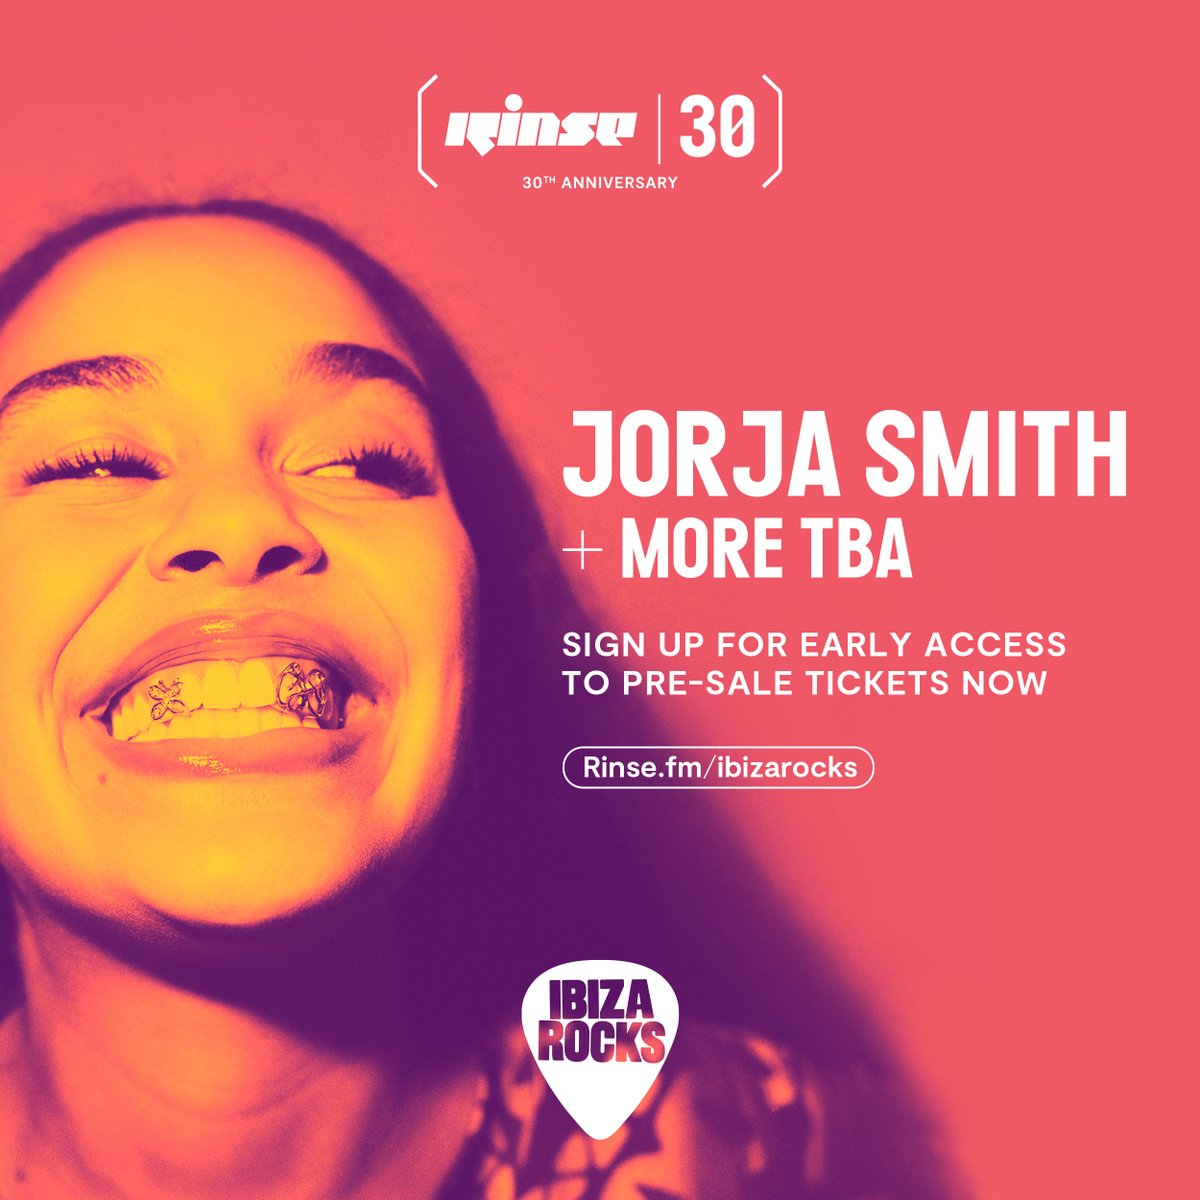 We're heading over to @ibizarocks with @JorjaSmith + more TBA on the 19th of September! 🏝️ Make sure you sign up for access to pre-sale tickets now! - qlcz6lgp42l.typeform.com/JorjaSmith